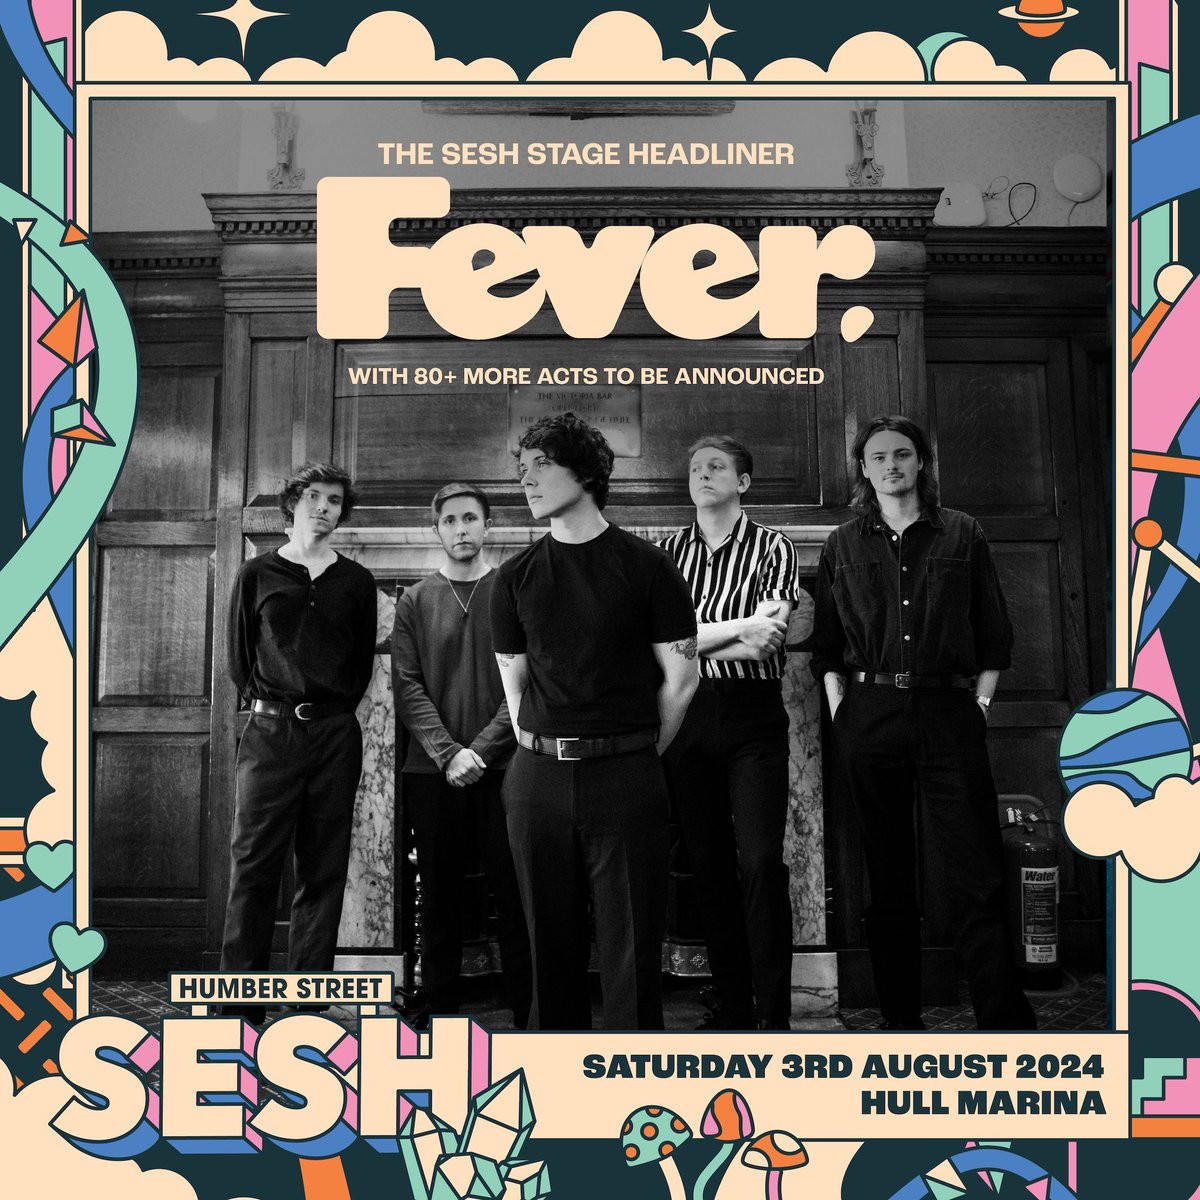 2024 THE SESH STAGE HEADLINER - @feverbanduk Hull's fave indie-rockers take the top spot on our newly named @theseshhull Stage (FKA Alt-Main). With huge EP 'Why Can't You Hear Me?' released today, we can't wait to hear it blasting across the Marina! 🎟 humberstreetsesh.co.uk